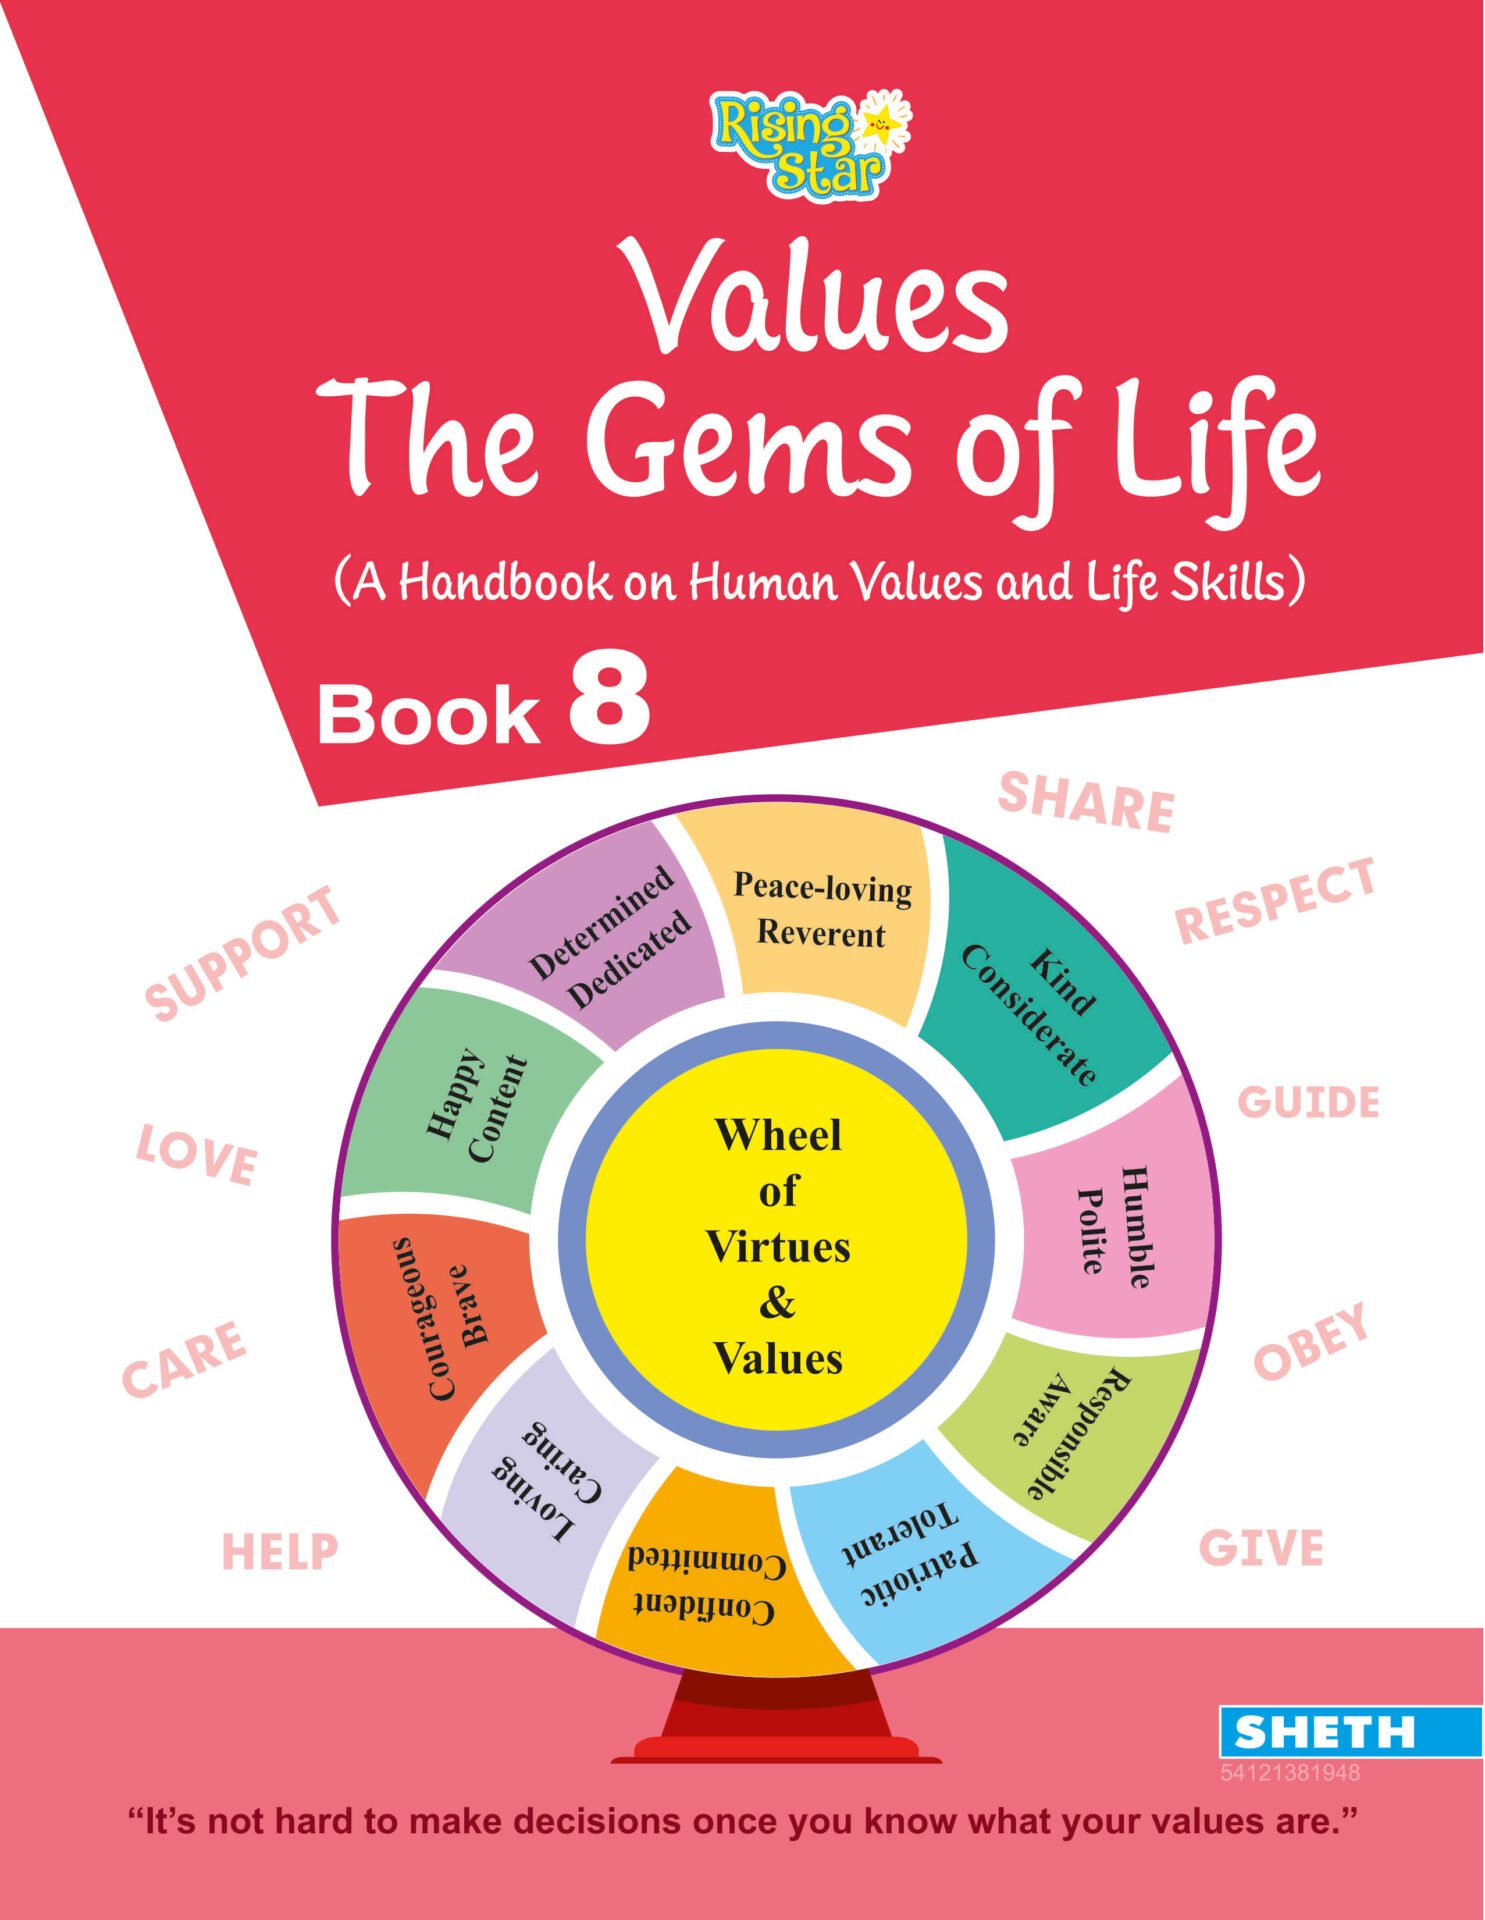 Rising Star Values The Gems of Life Book 8 1 1